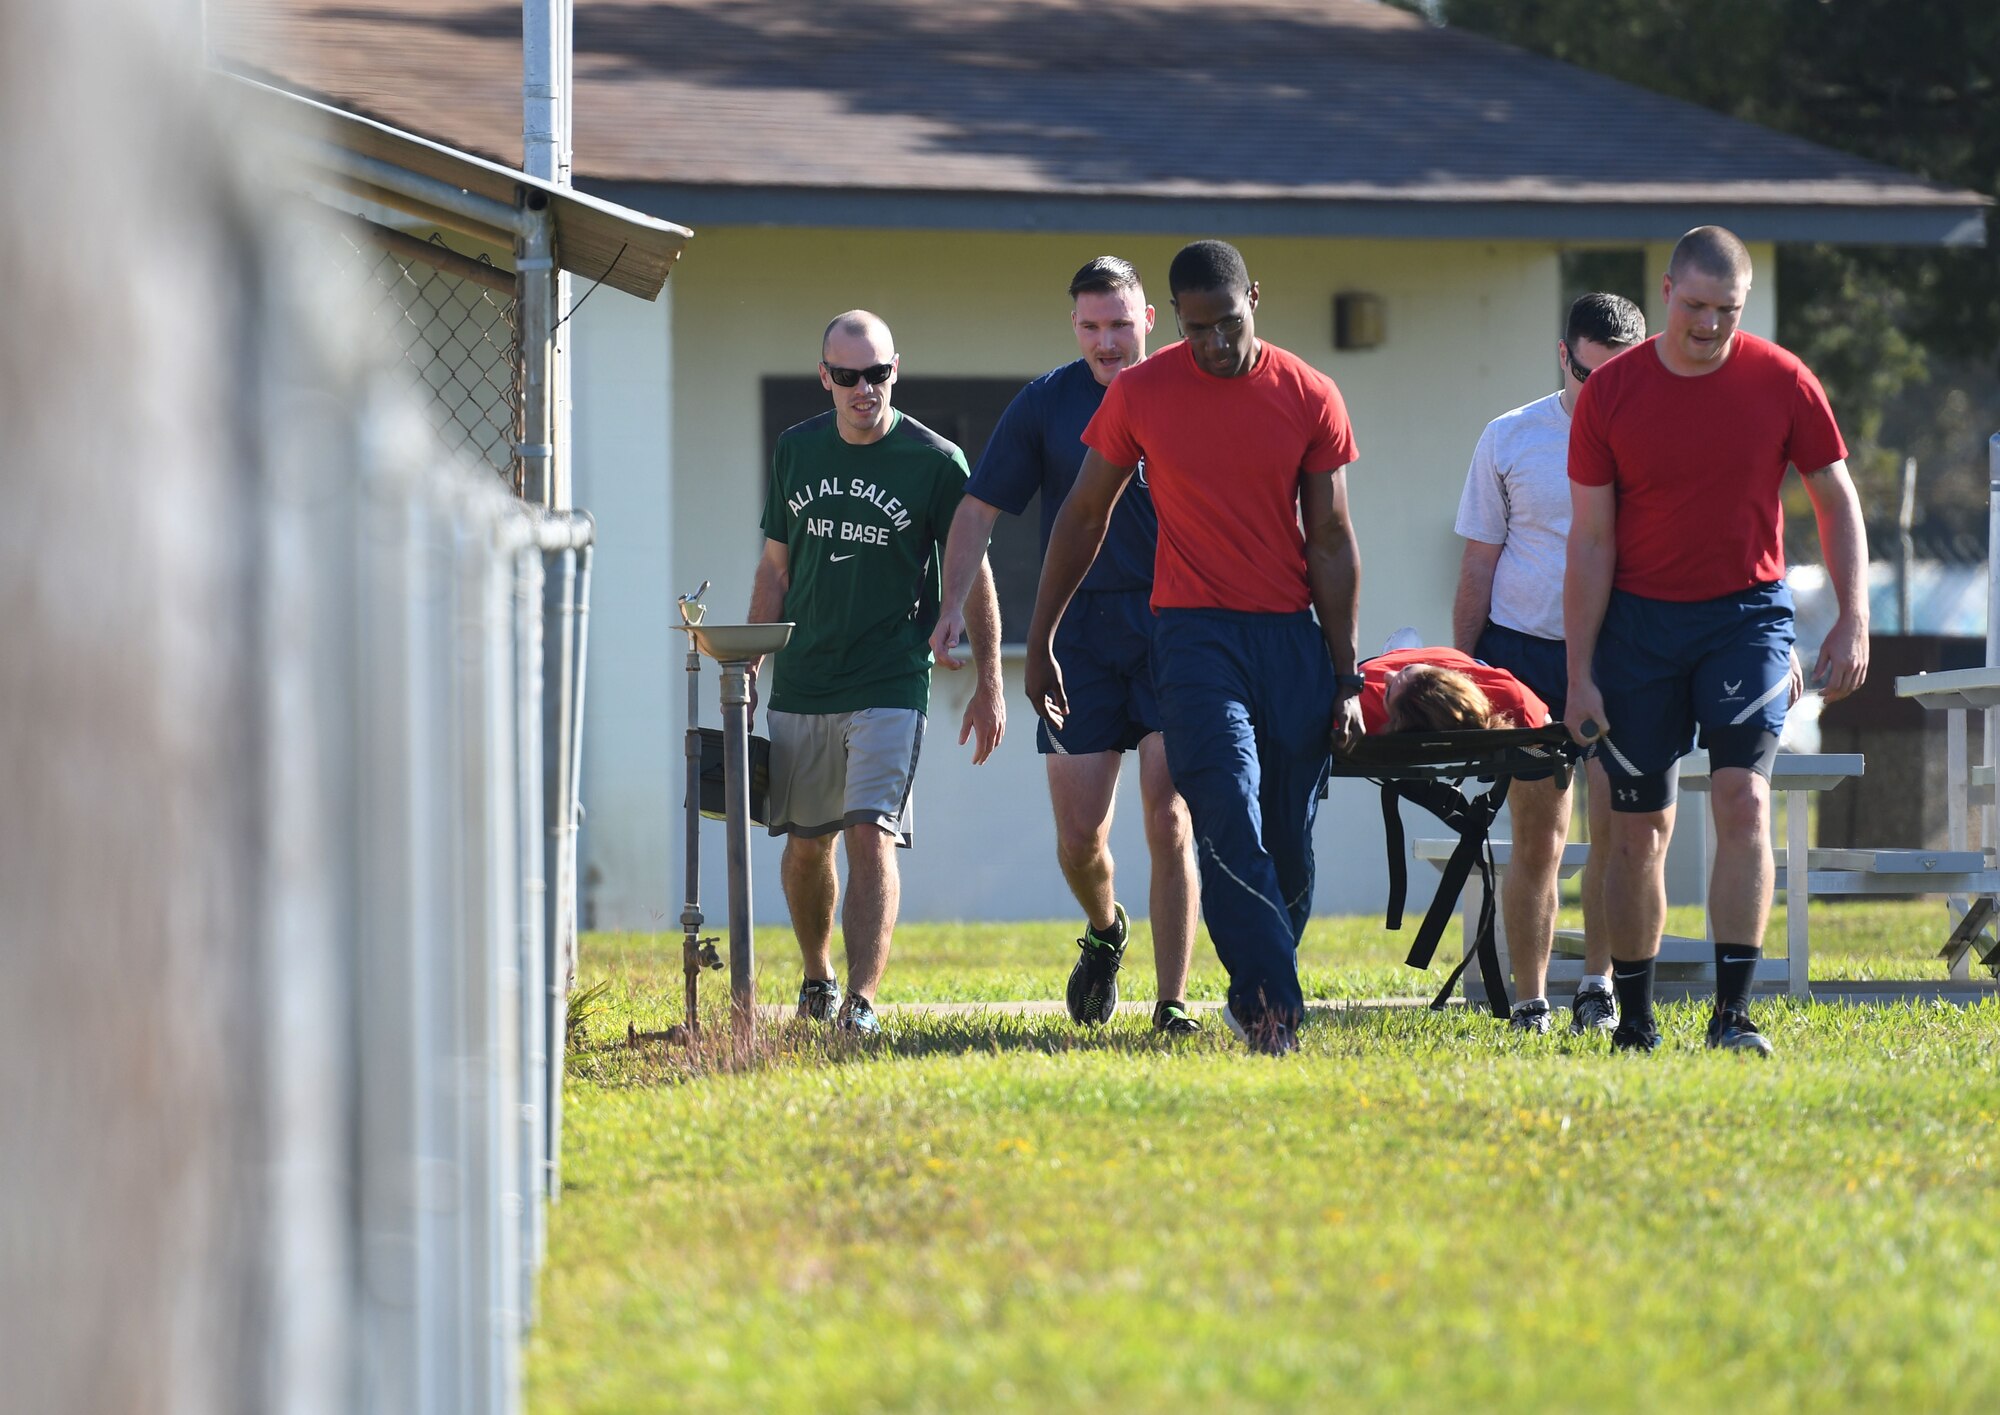 Keesler Airmen participate in a litter carry during Wingman Day Nov. 16, 2017, on Keesler Air Force Base, Mississippi. Wingman Day consisted of Keesler Airmen participating in unit-wide Comprehensive Airman Fitness courses which focused on resiliency and teambuilding initiatives across the base. (U.S. Air Force photo by Kemberly Groue)